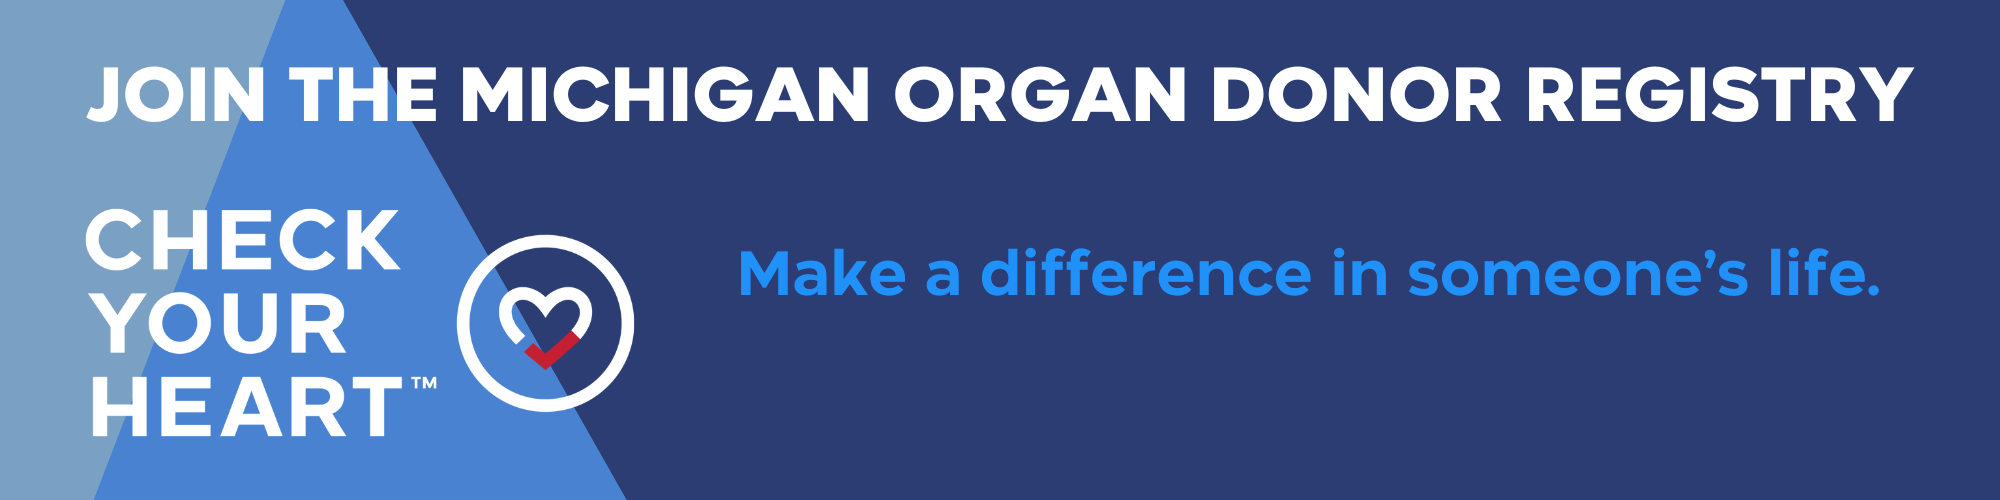 Join the Michigan Organ Donor Registry